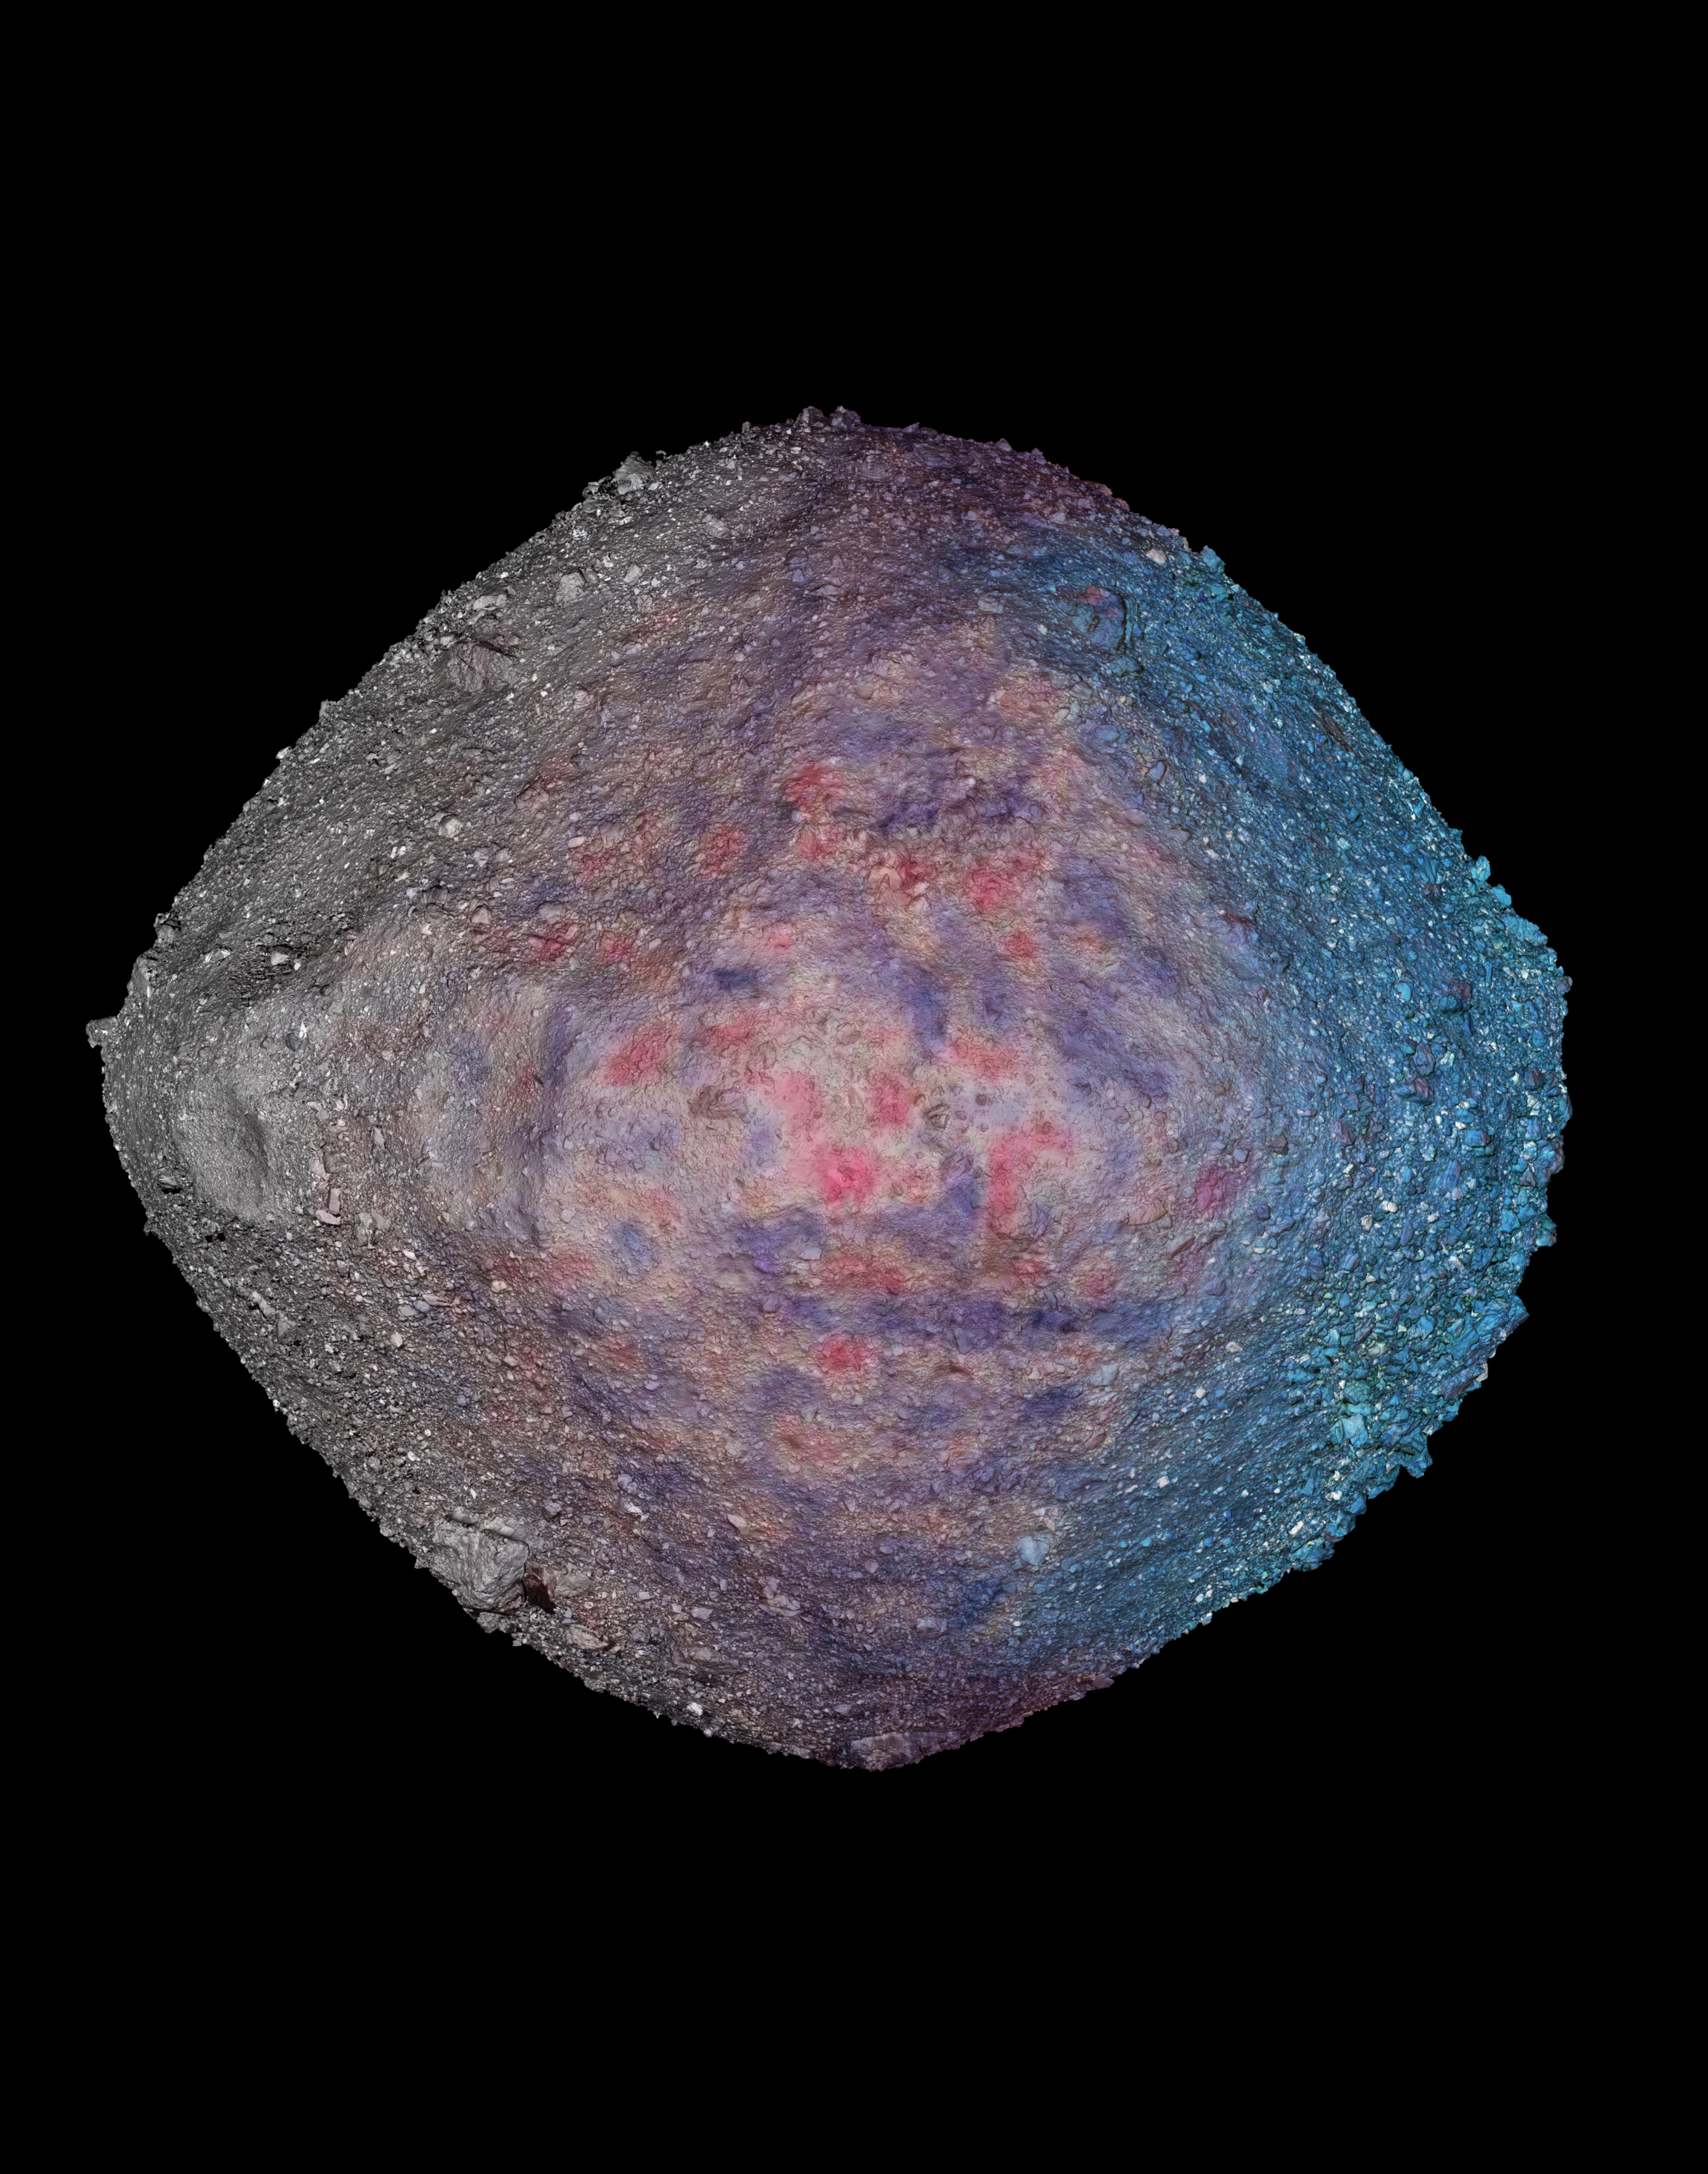 3d model of asteroid Bennu with three data layers. Left to right - Albedo map with global image mosaic, carbon data, and false-color imagery. 